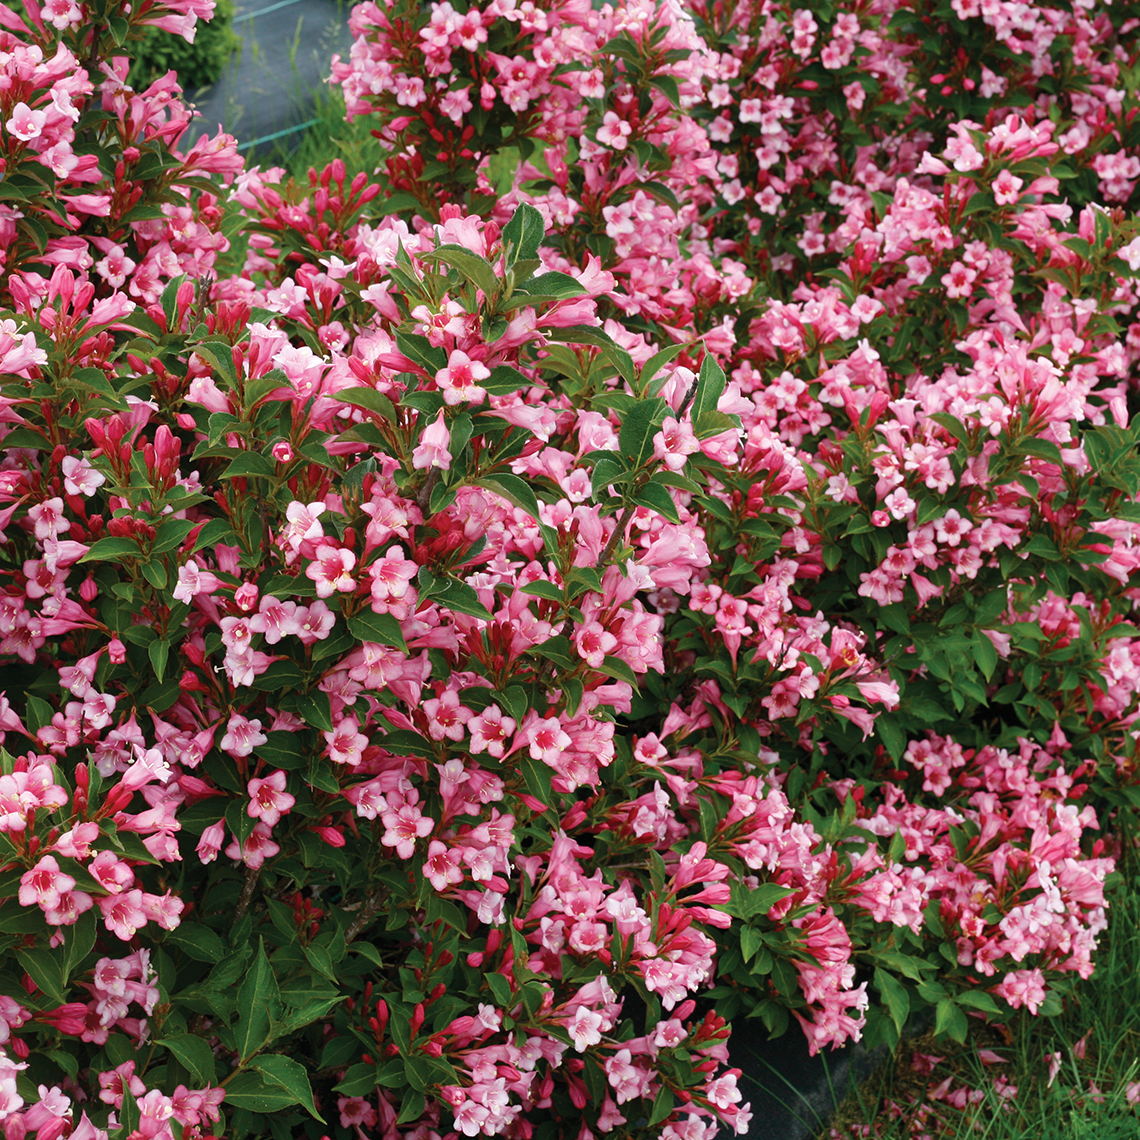 Czechmark Twopink weigela in full bloom in the landscape with an enormous quantity of flowers